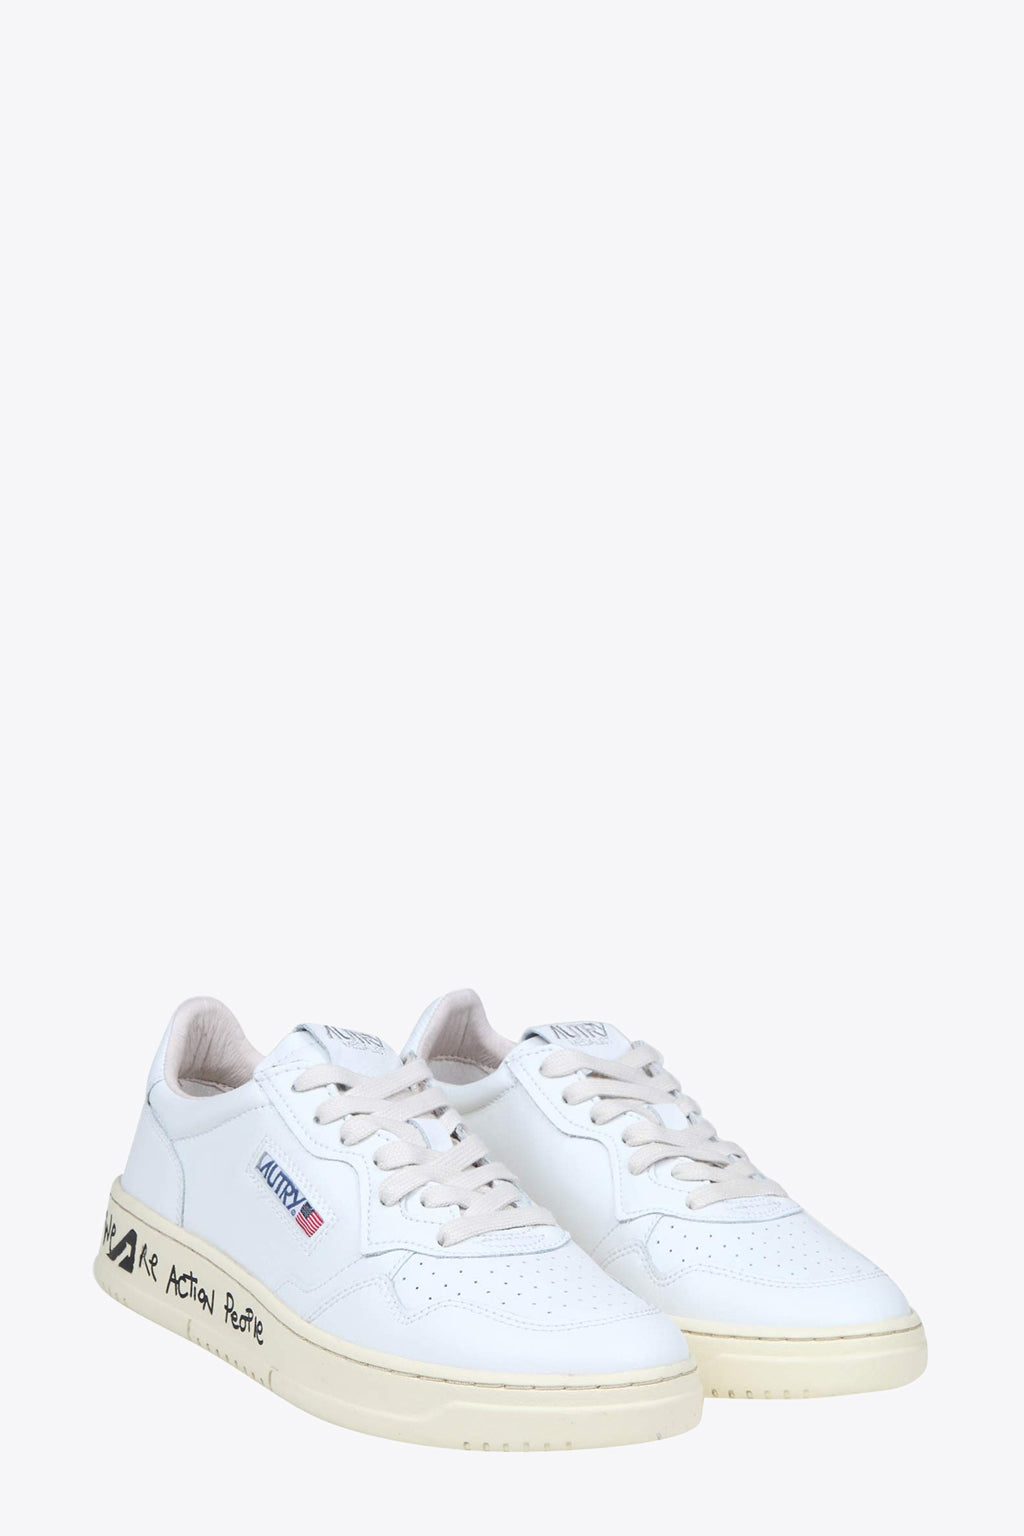 alt-image__White-leather-low-sneaker-with-printed-sole---Medalist